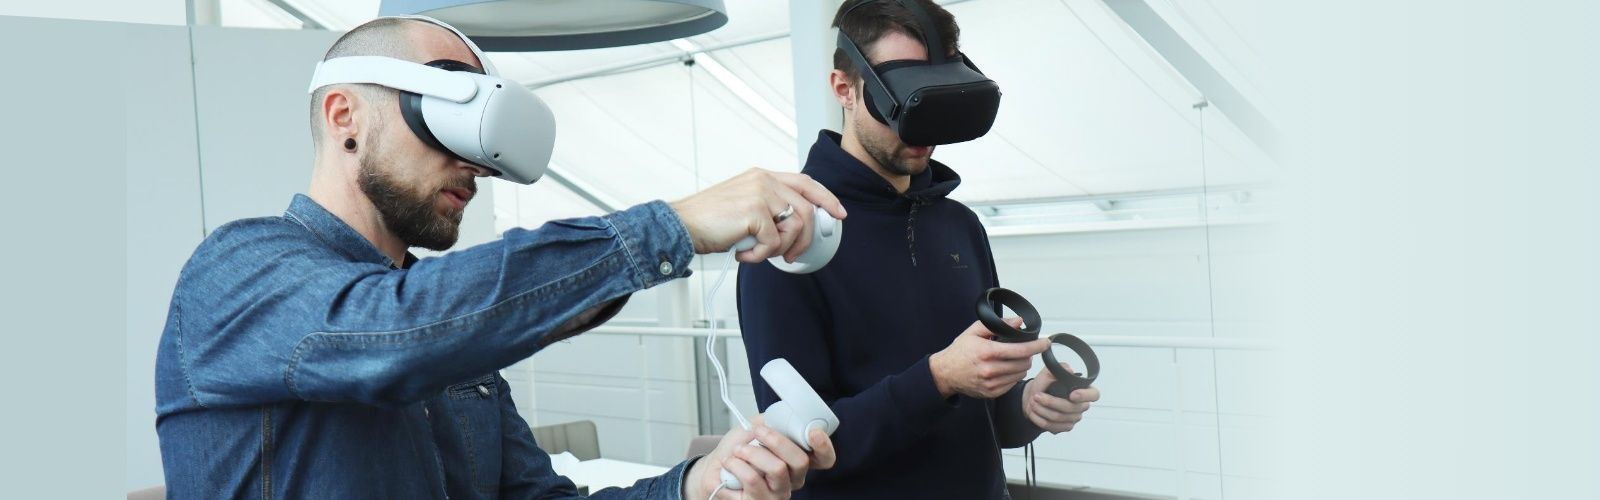 VR glasses are used by two people